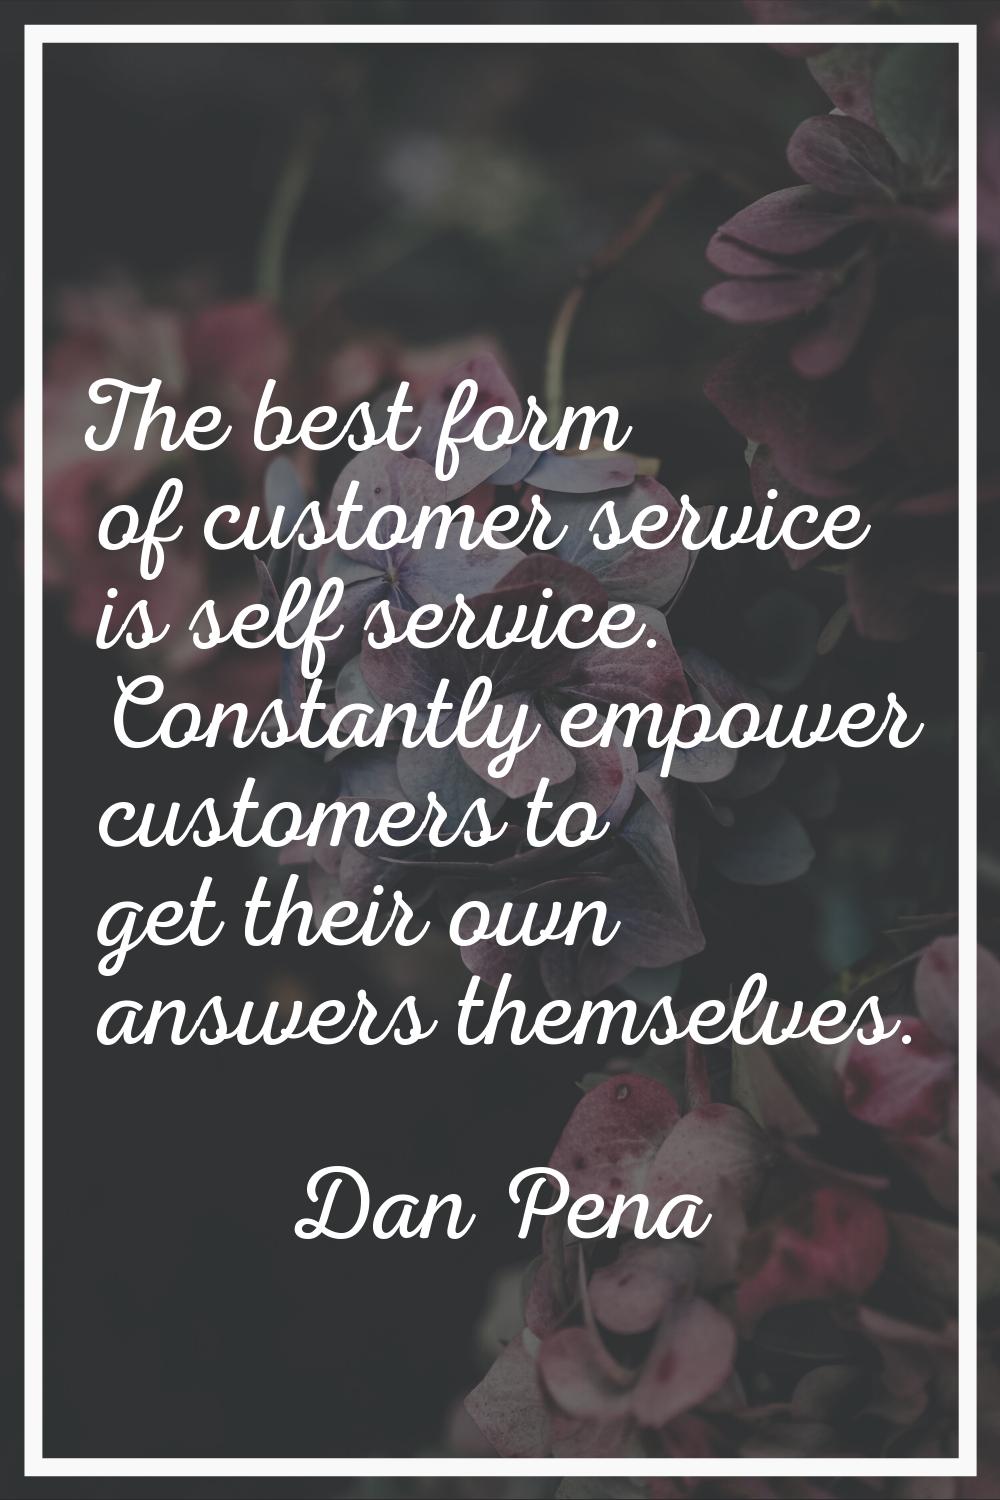 The best form of customer service is self service. Constantly empower customers to get their own an